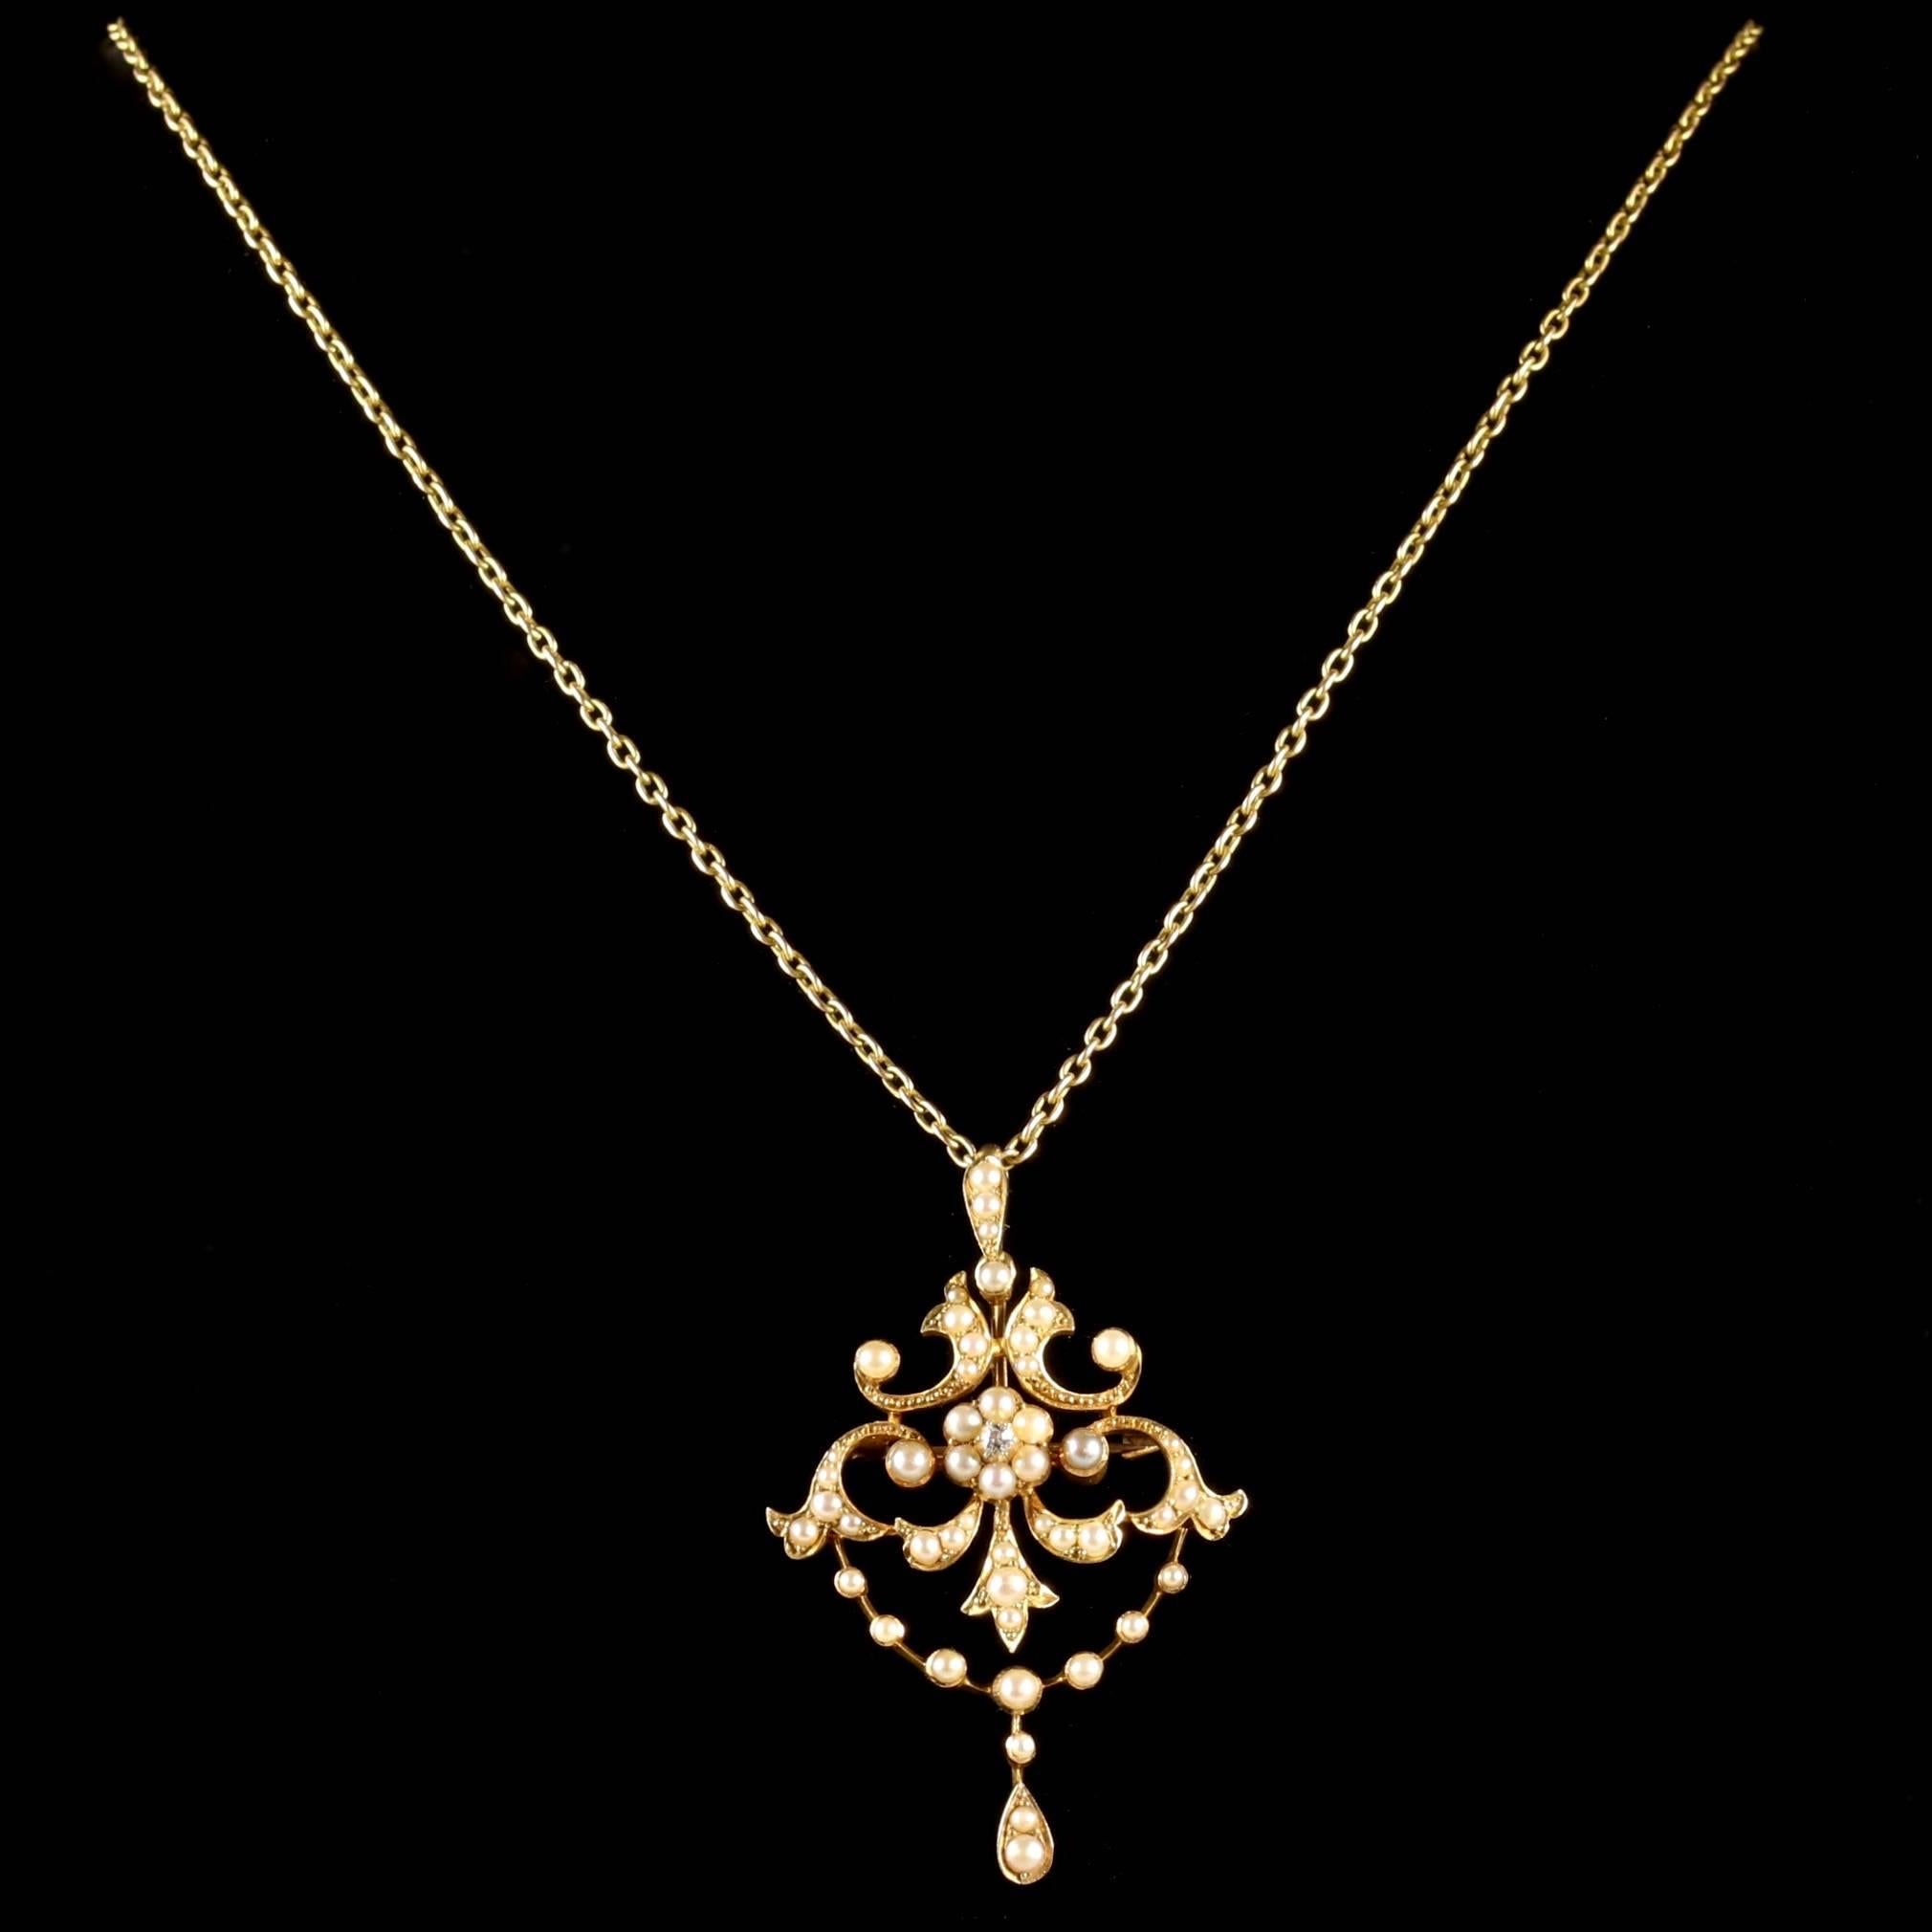 This is outstanding, a fabulous Victorian 15ct Yellow Gold pendant brooch and necklace which is truly beautiful.

This pendant is adorned with lustrous Pearls and a central old cut Diamond.

Pearls are organically created over many years and have